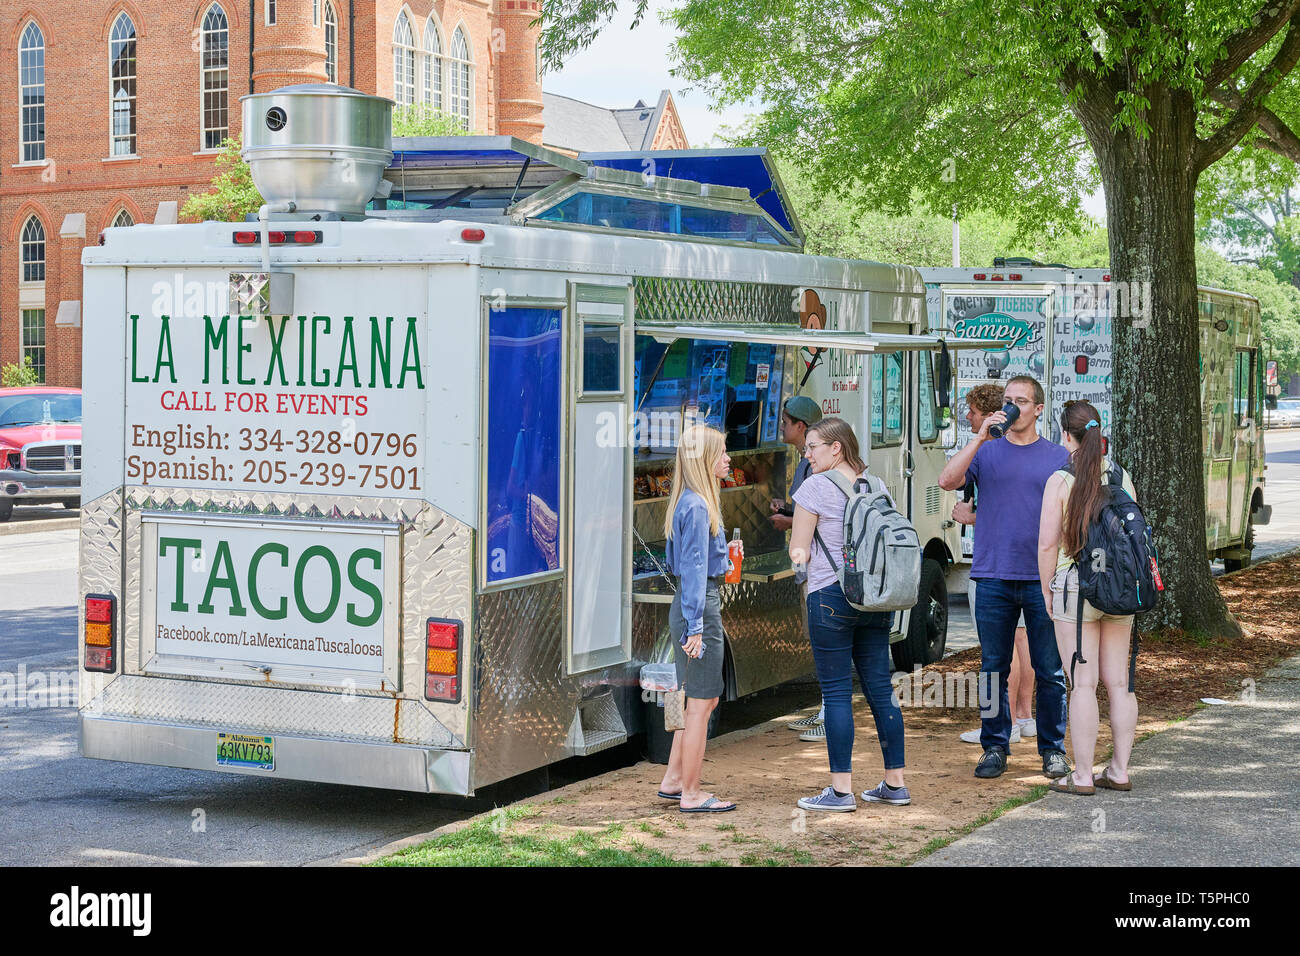 Students gather or in line at a Taco truck or food truck on the campus of the University of Alabama at lunch time in Tuscaloosa Alabama, USA. Stock Photo